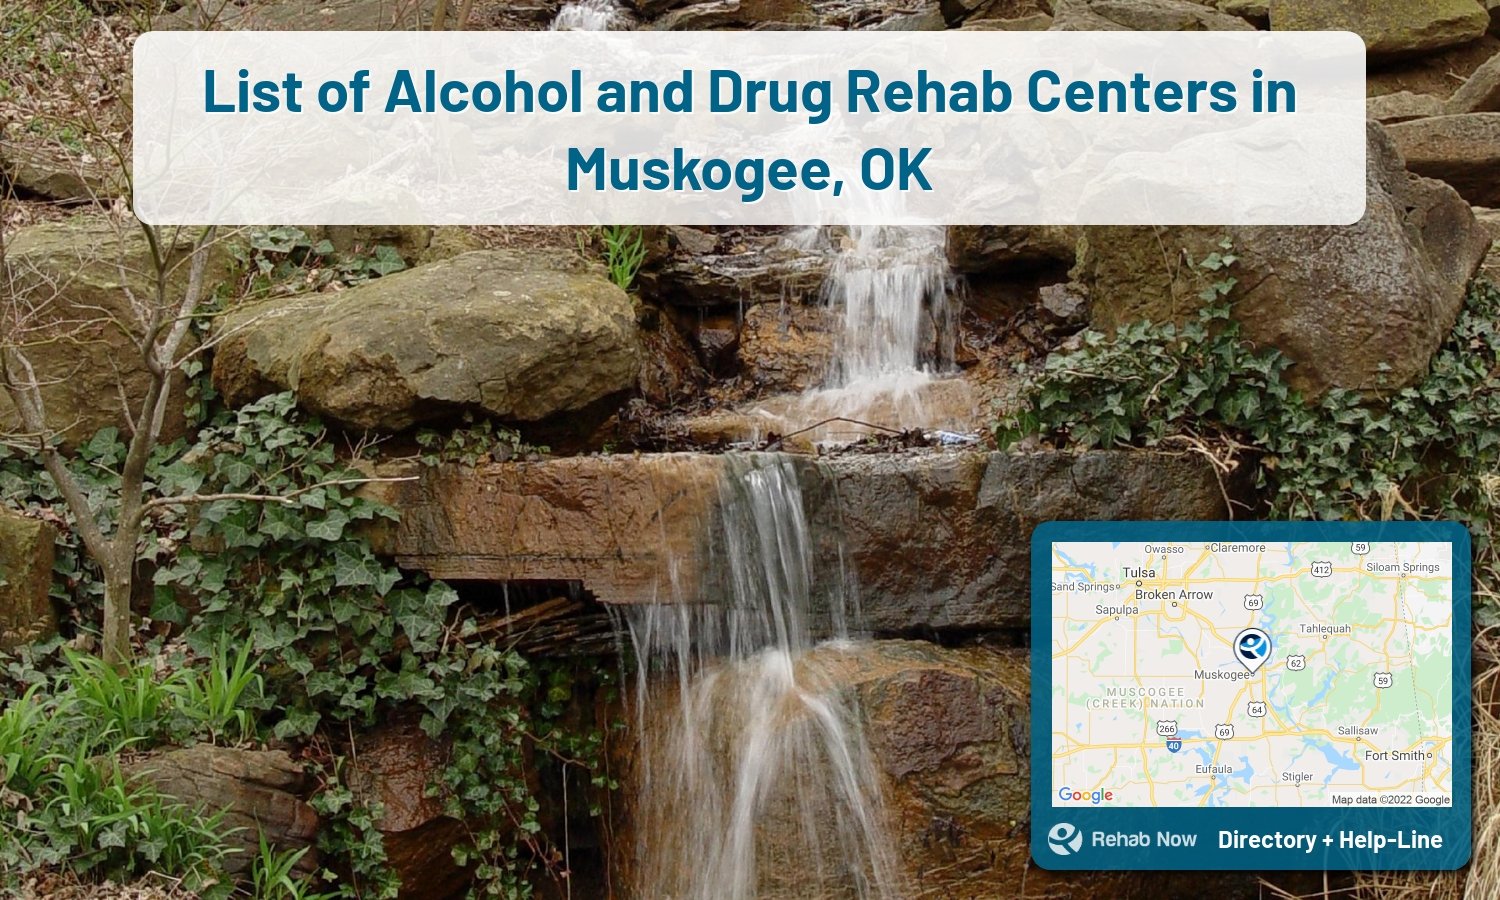 View options, availability, treatment methods, and more, for drug rehab and alcohol treatment in Muskogee, Oklahoma